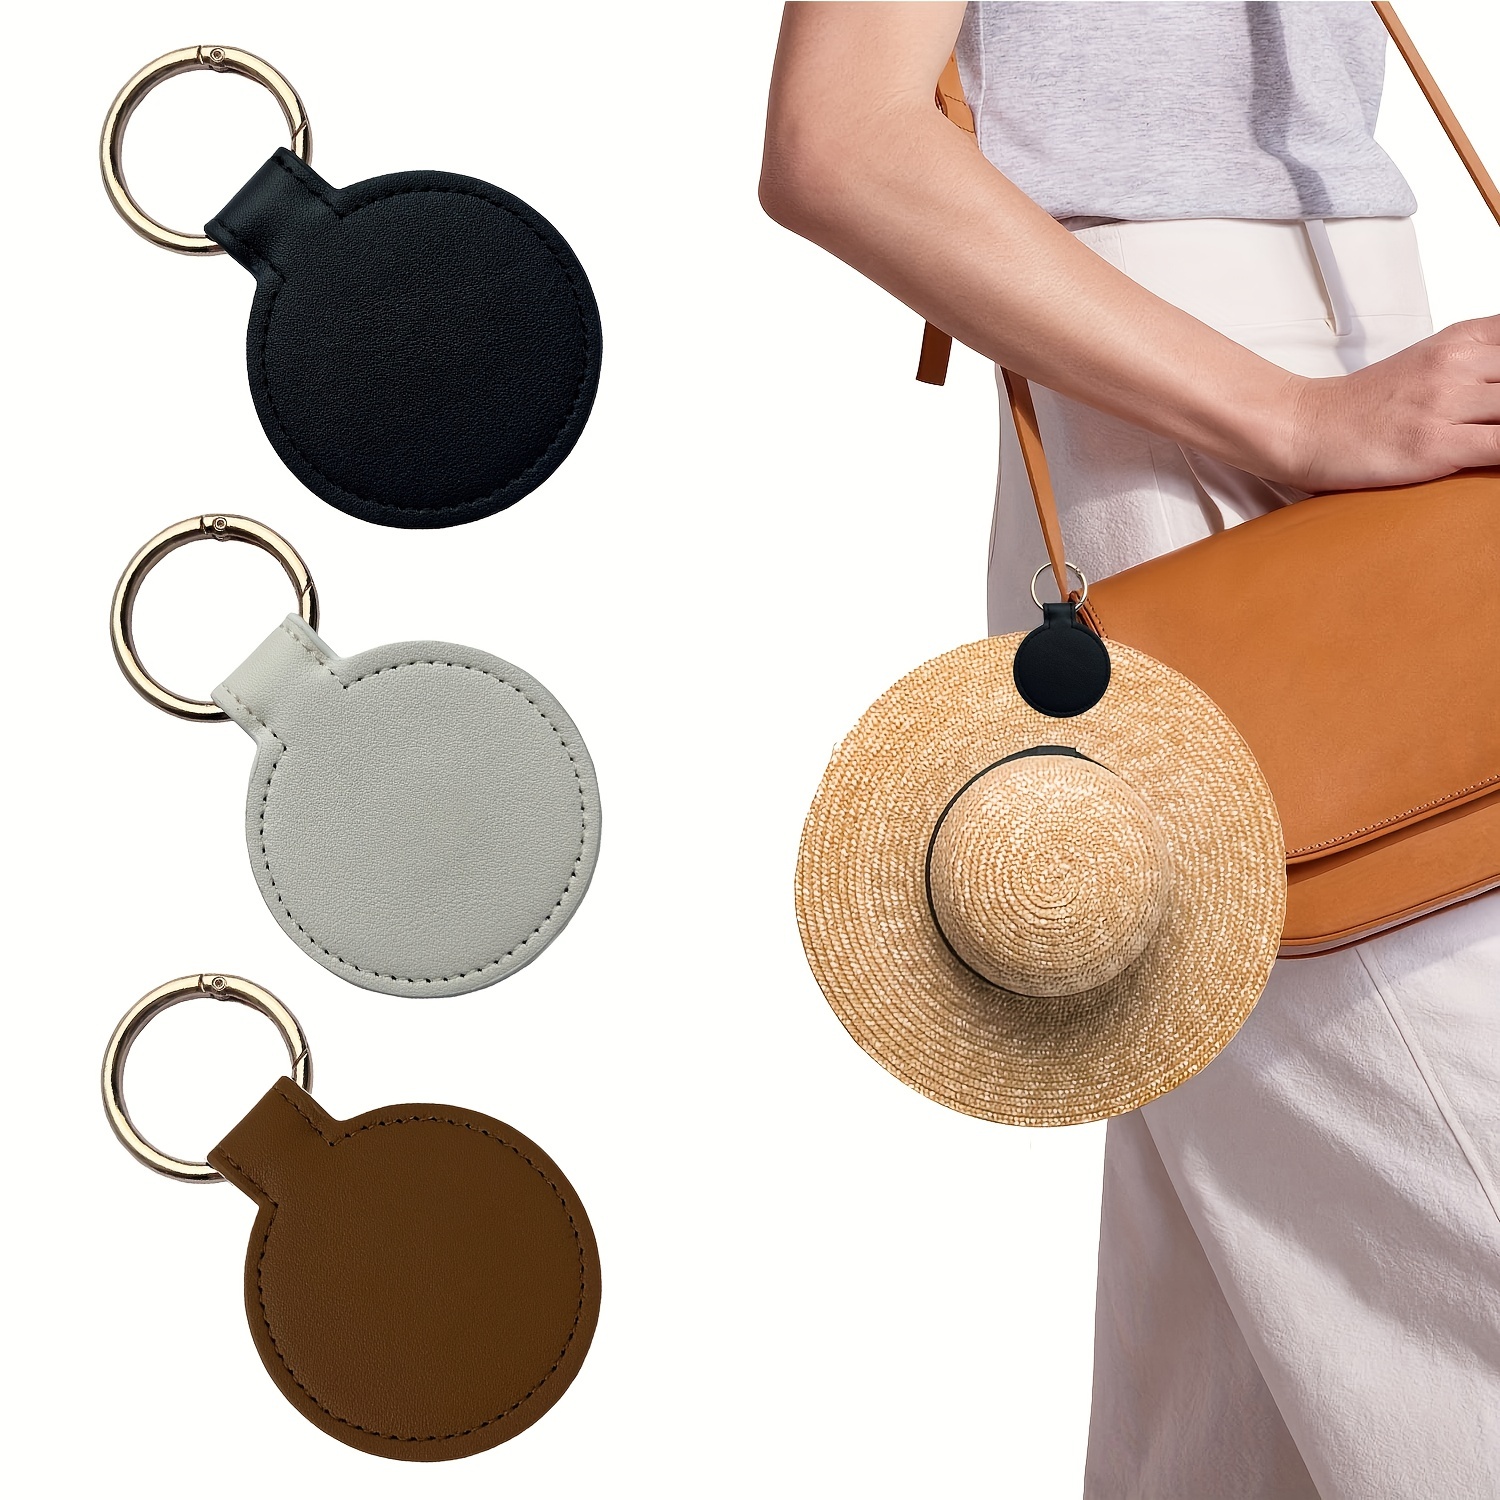 Hat Clip For Travel, Magnetic Hat Clip For Luggage Handbag Backpack Purse  Totes, Hands Free Bag Accessory